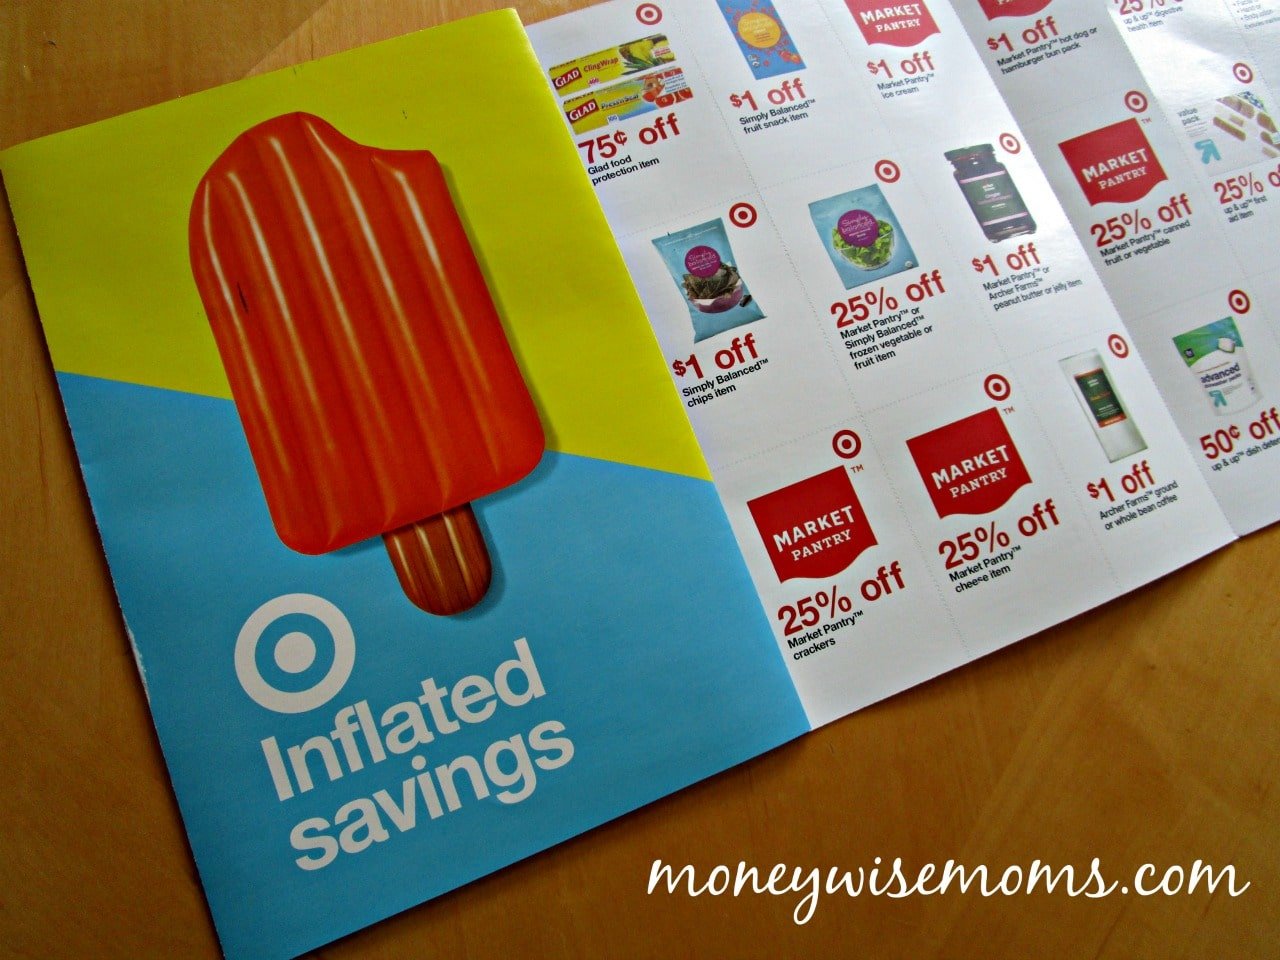 How to save money at Target